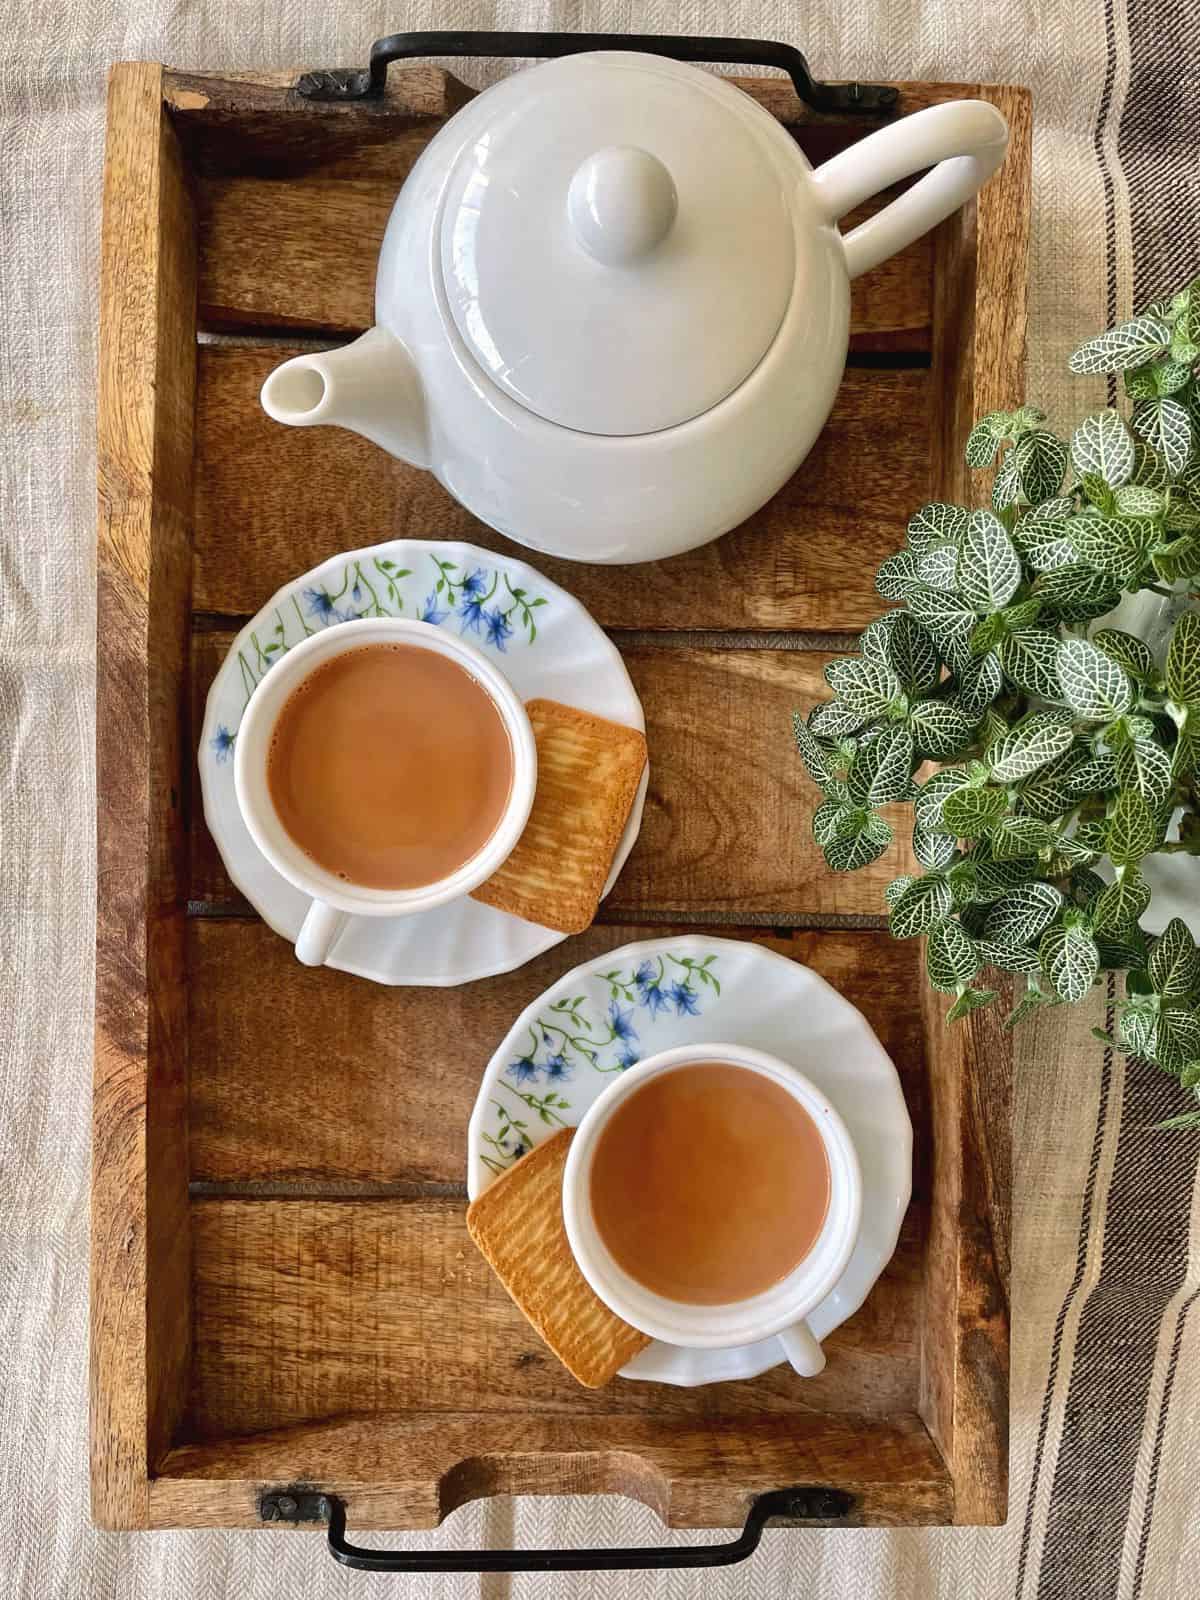 homemade masala chai served with biscuits